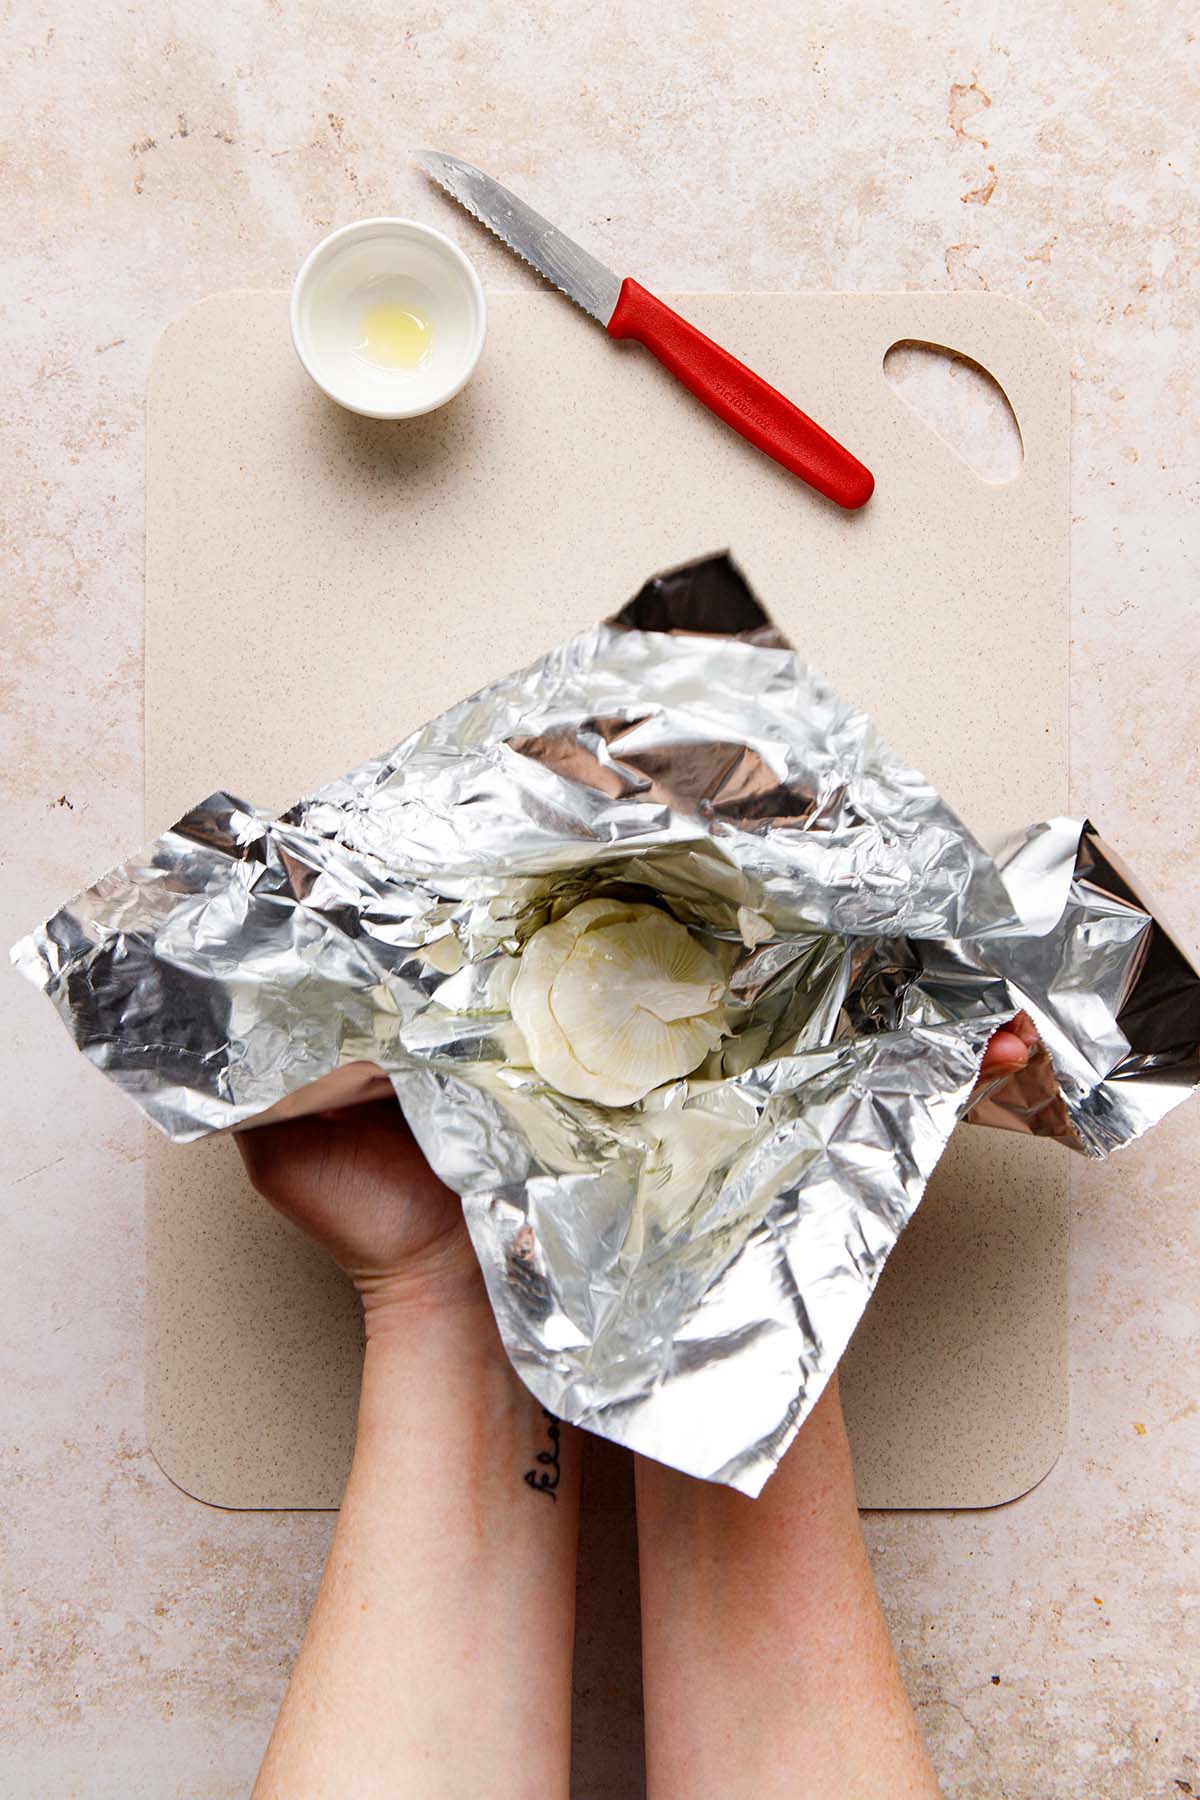 Hands wrapping garlic in foil.